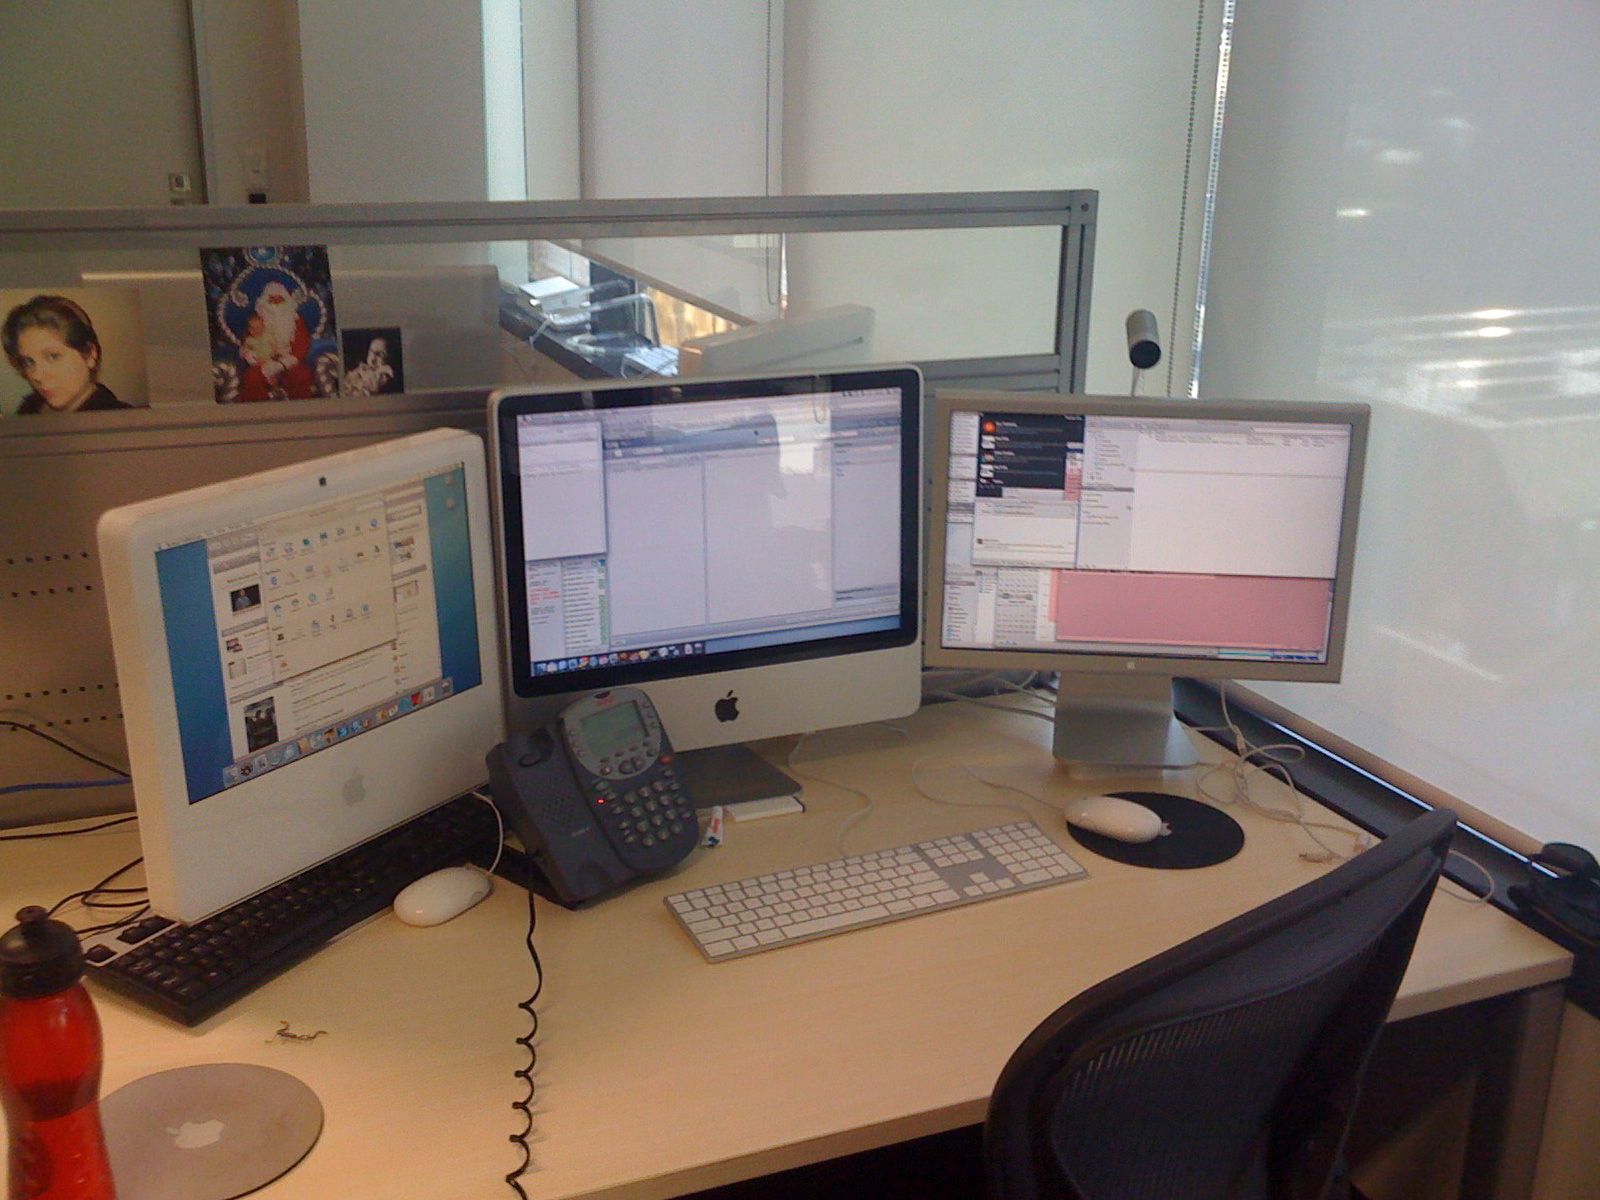 A photo of my desk at work, with a 20" aluminium iMac in the middle, a 20" Cinema Display to the right of it, and a 17" white plastic iMac to the left.